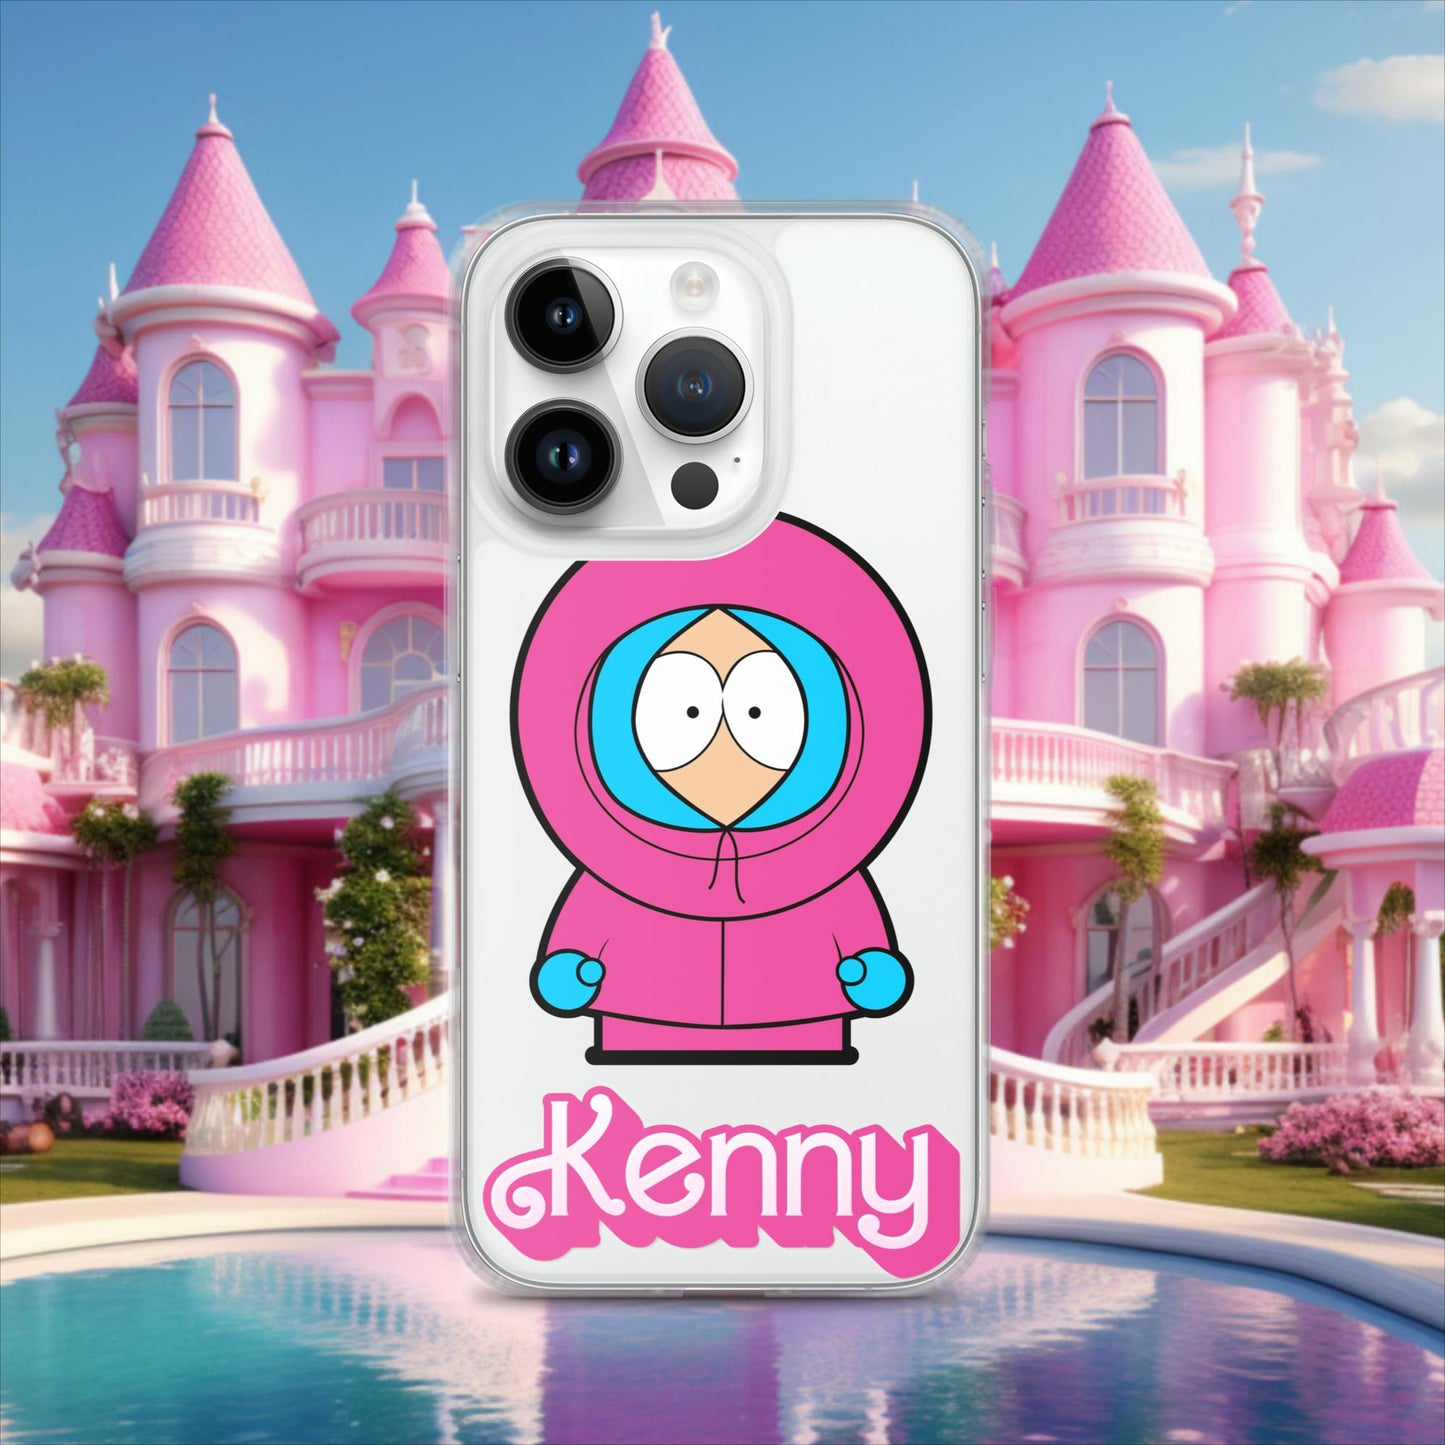 Kenny McCormick Ken Ryan Gosling Barbie South Park Kenny Clear Case for iPhone Next Cult Brand